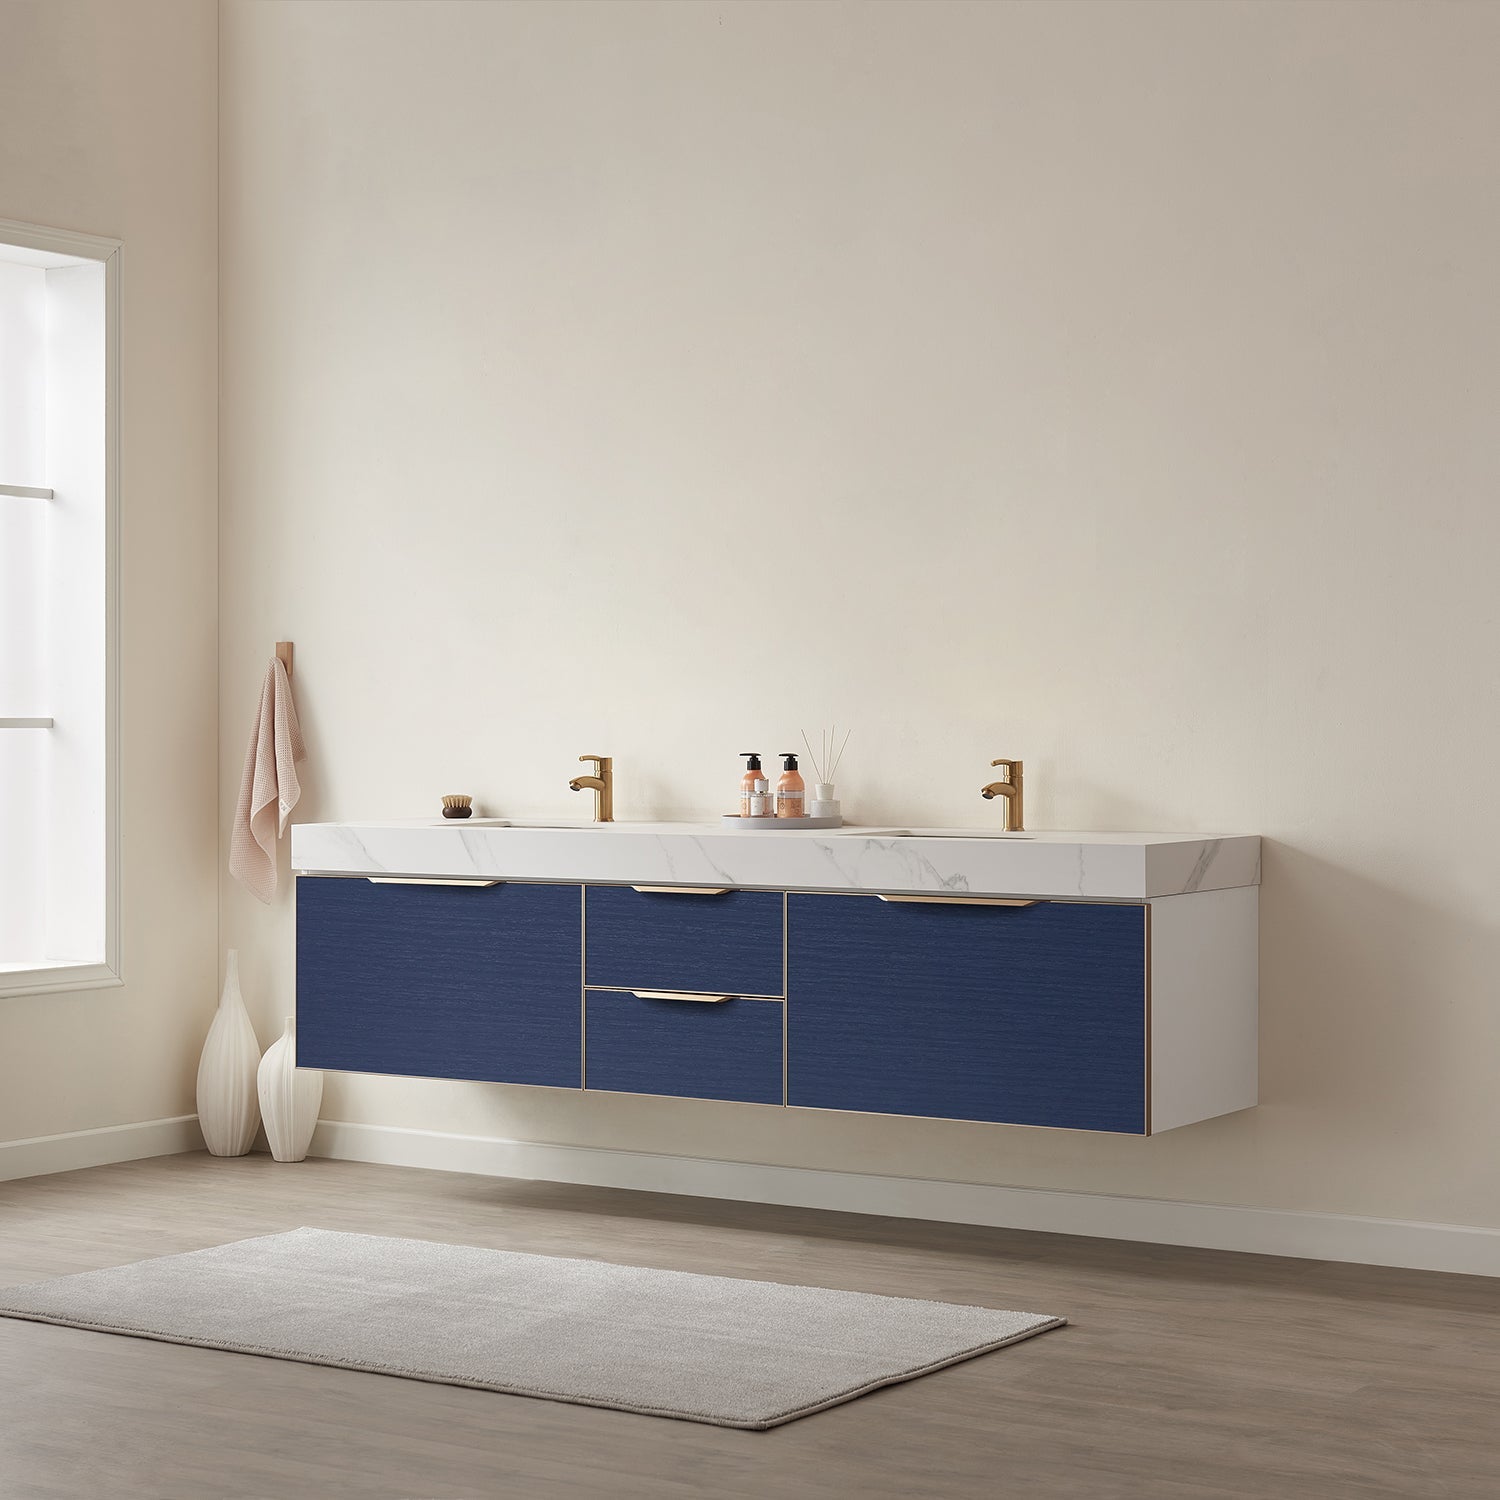 Vinnova Design Alicante 84" Double Vanity in Classic Blue with White Sintered Stone Countertop and Undermount Sink - New Star Living